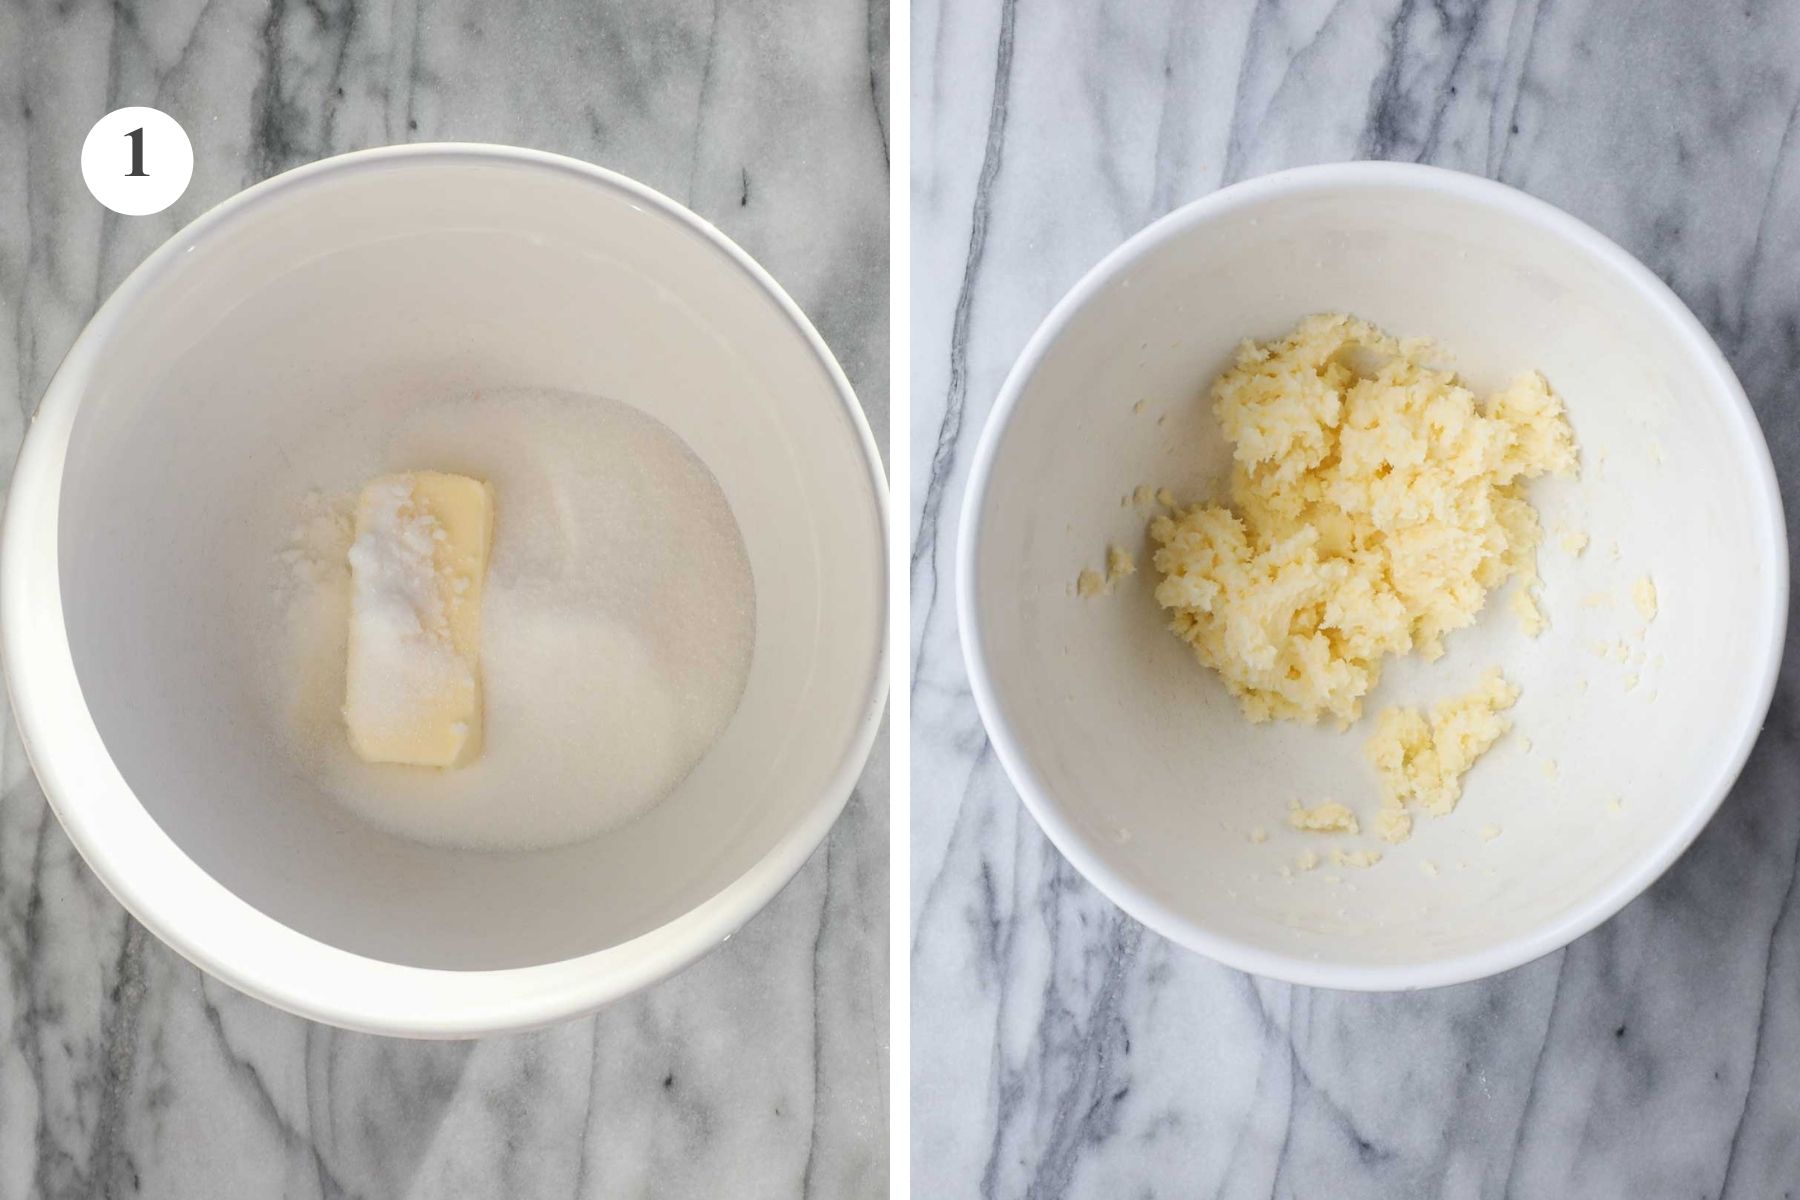 Butter and sugar in a bowl, next to the same bowl with butter and sugar creamed together.